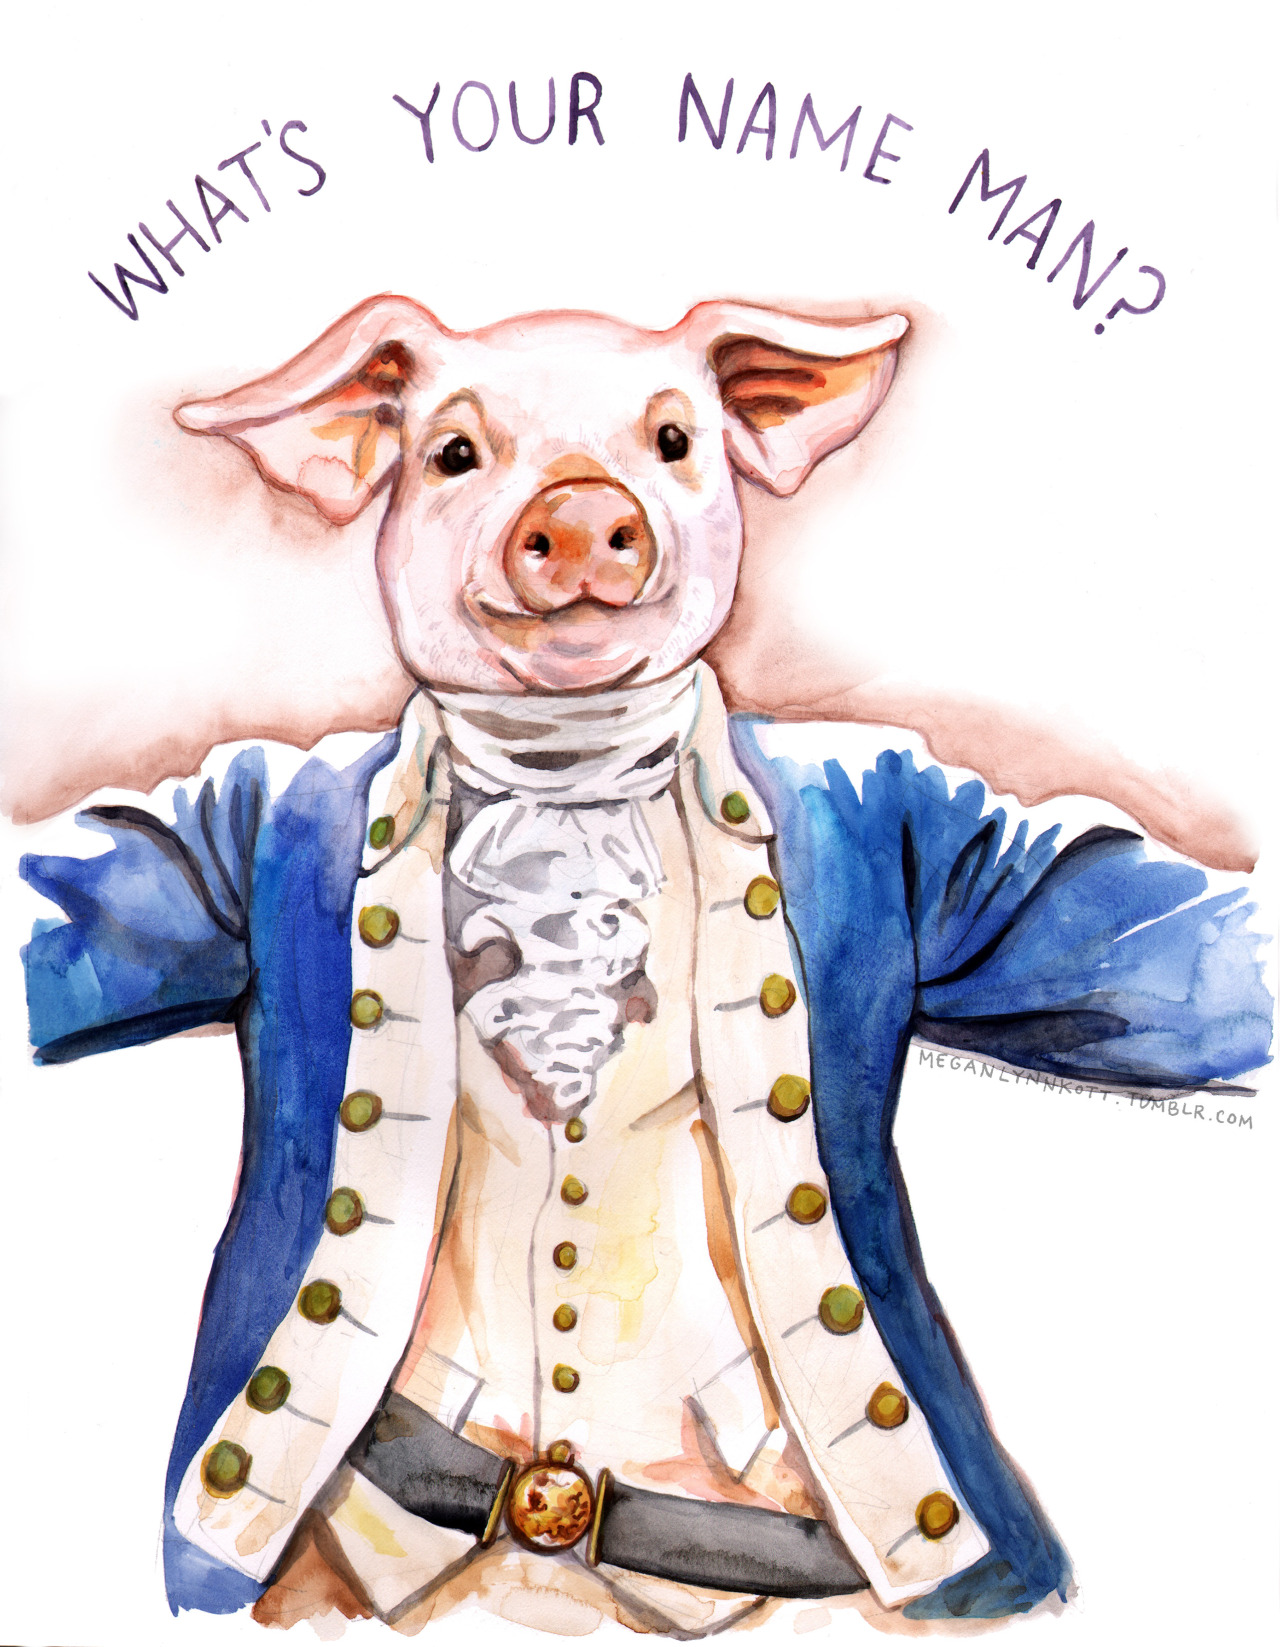 Hamilton the Pig on X: They show we have all been waiting for